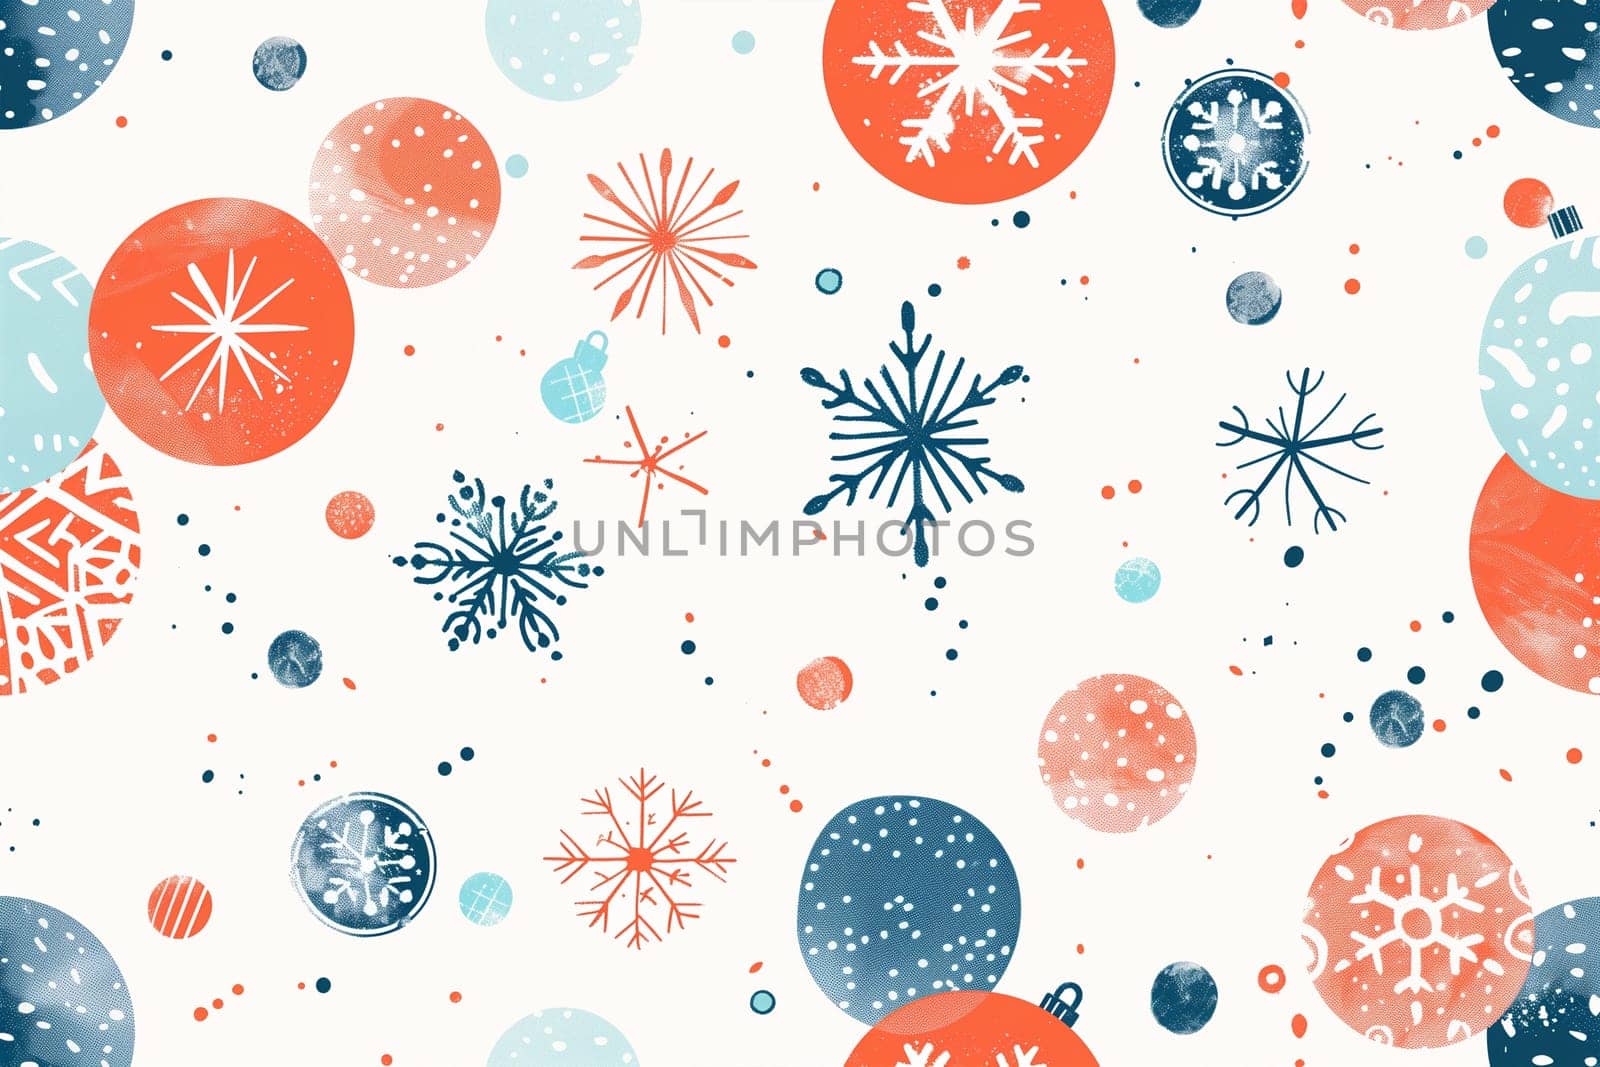 Rows of red and blue snowflakes on a white background.